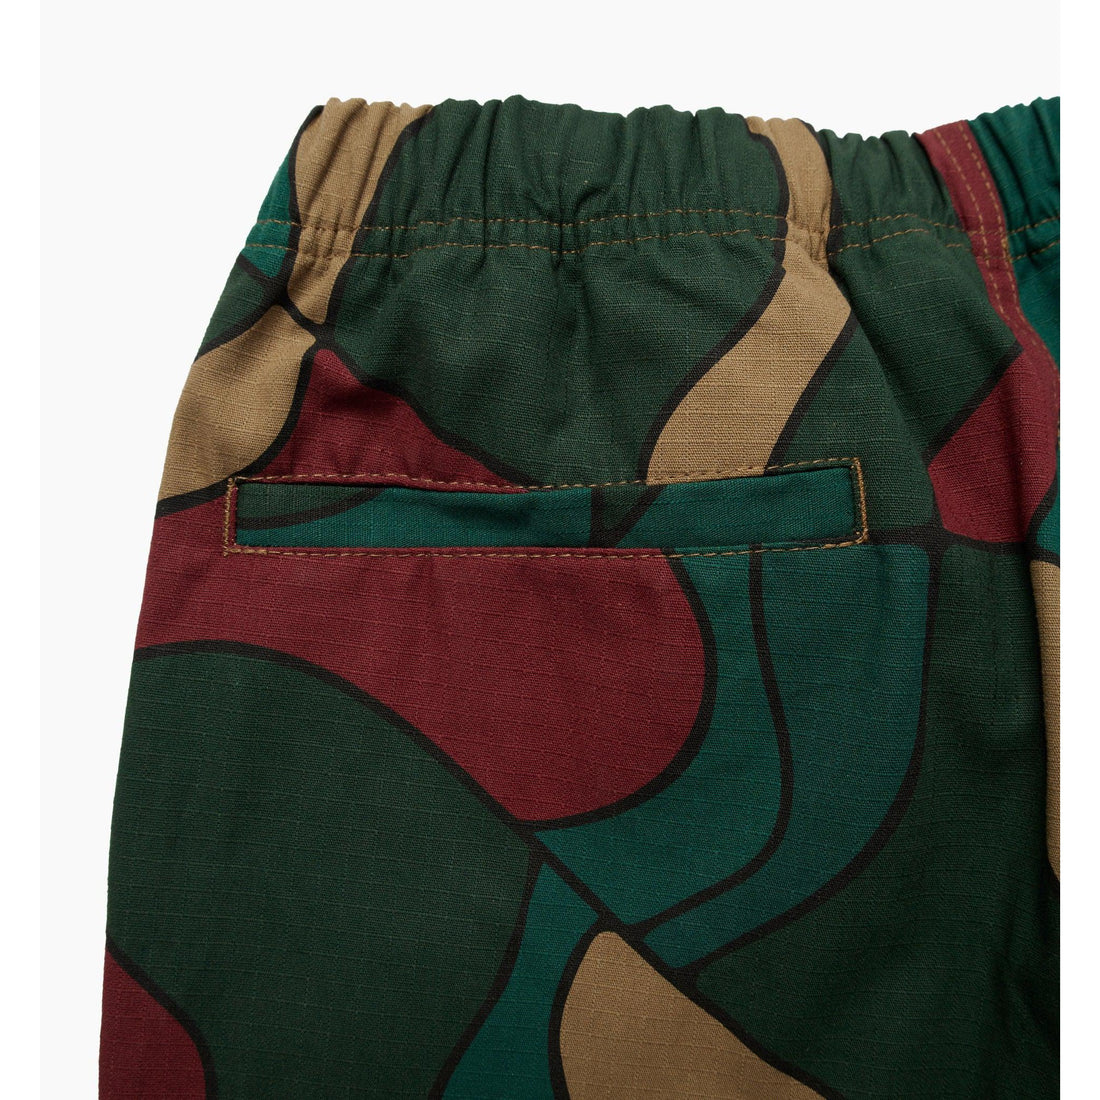 BY PARRA - TREES IN THE WIND RELAXED PANTS - CAMO GREEN